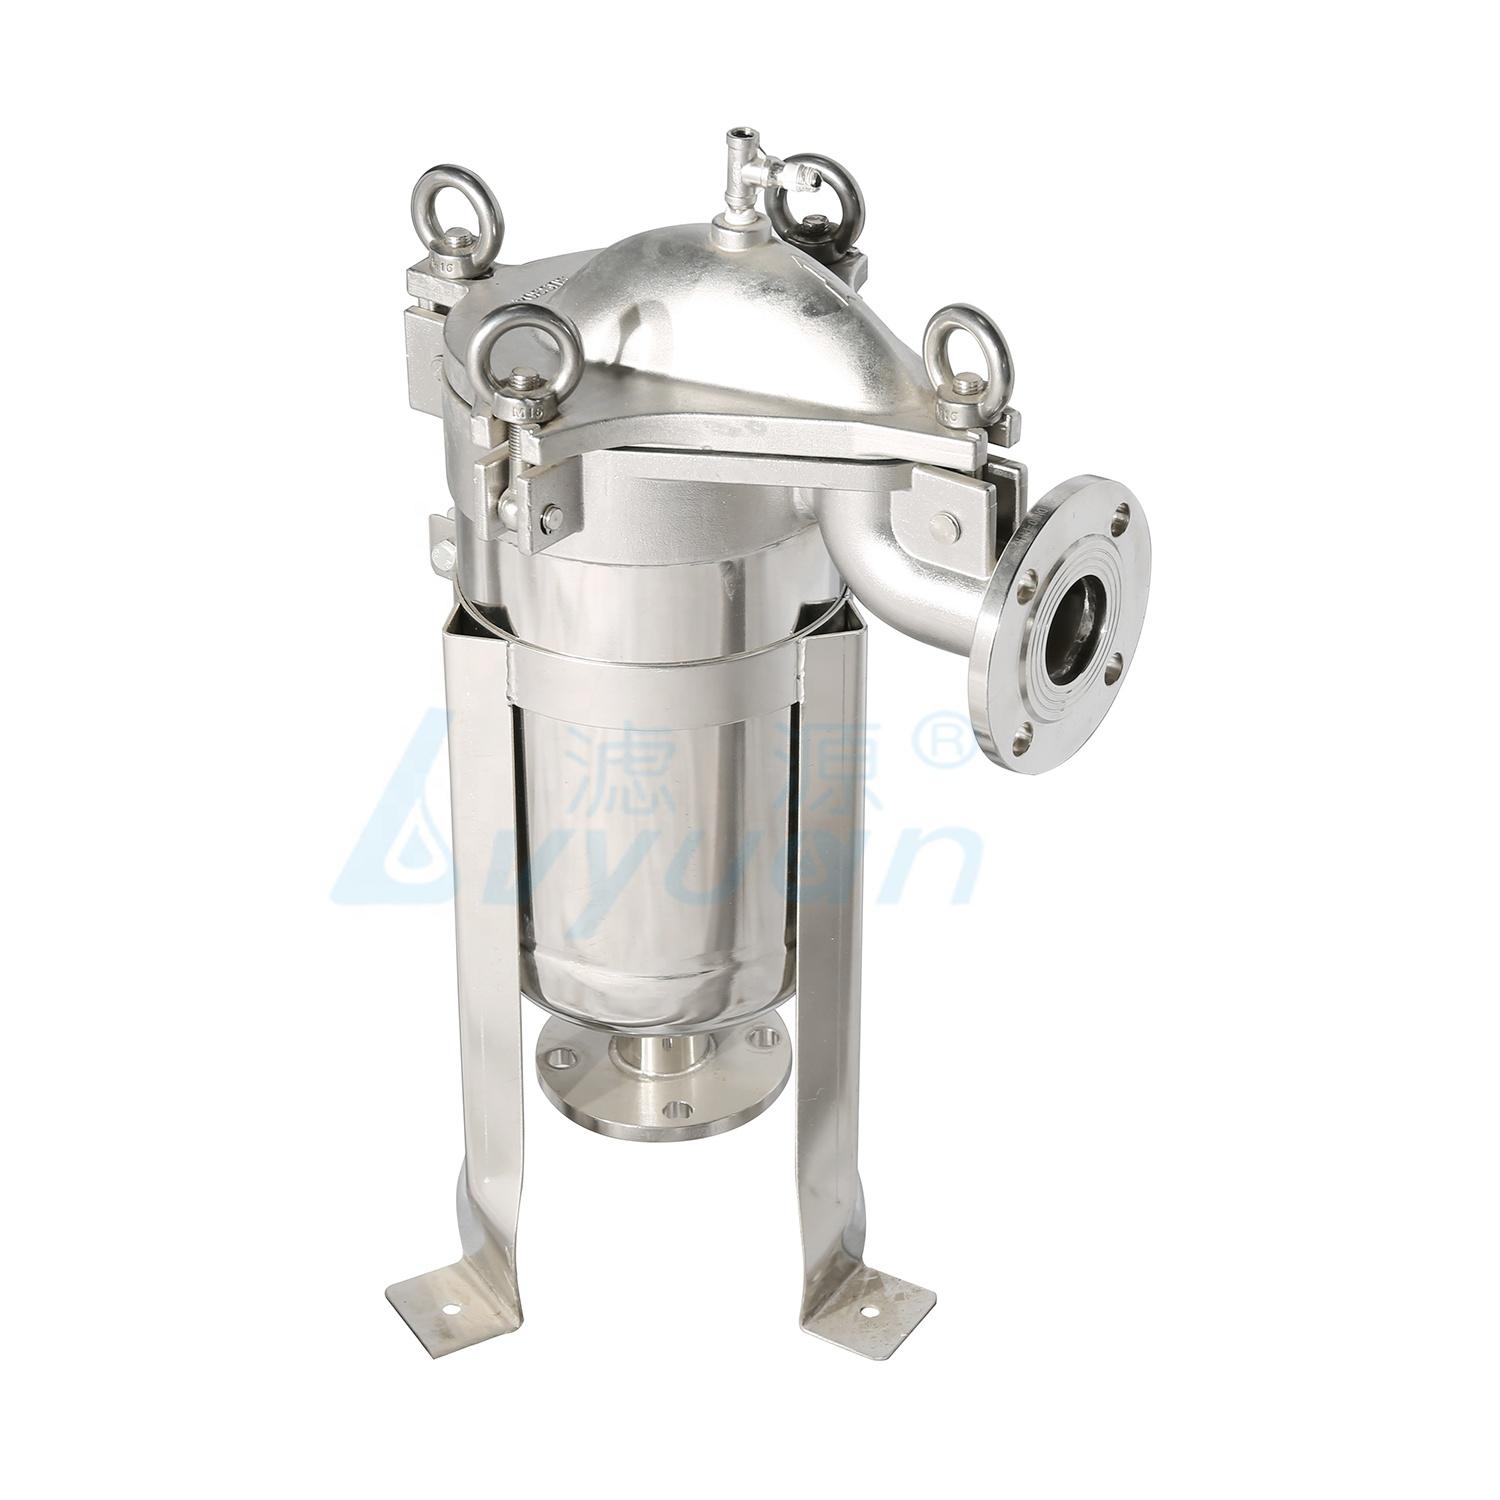 ss304 stainless steel bag filter housing/water bag filter for industrial liquid filtration